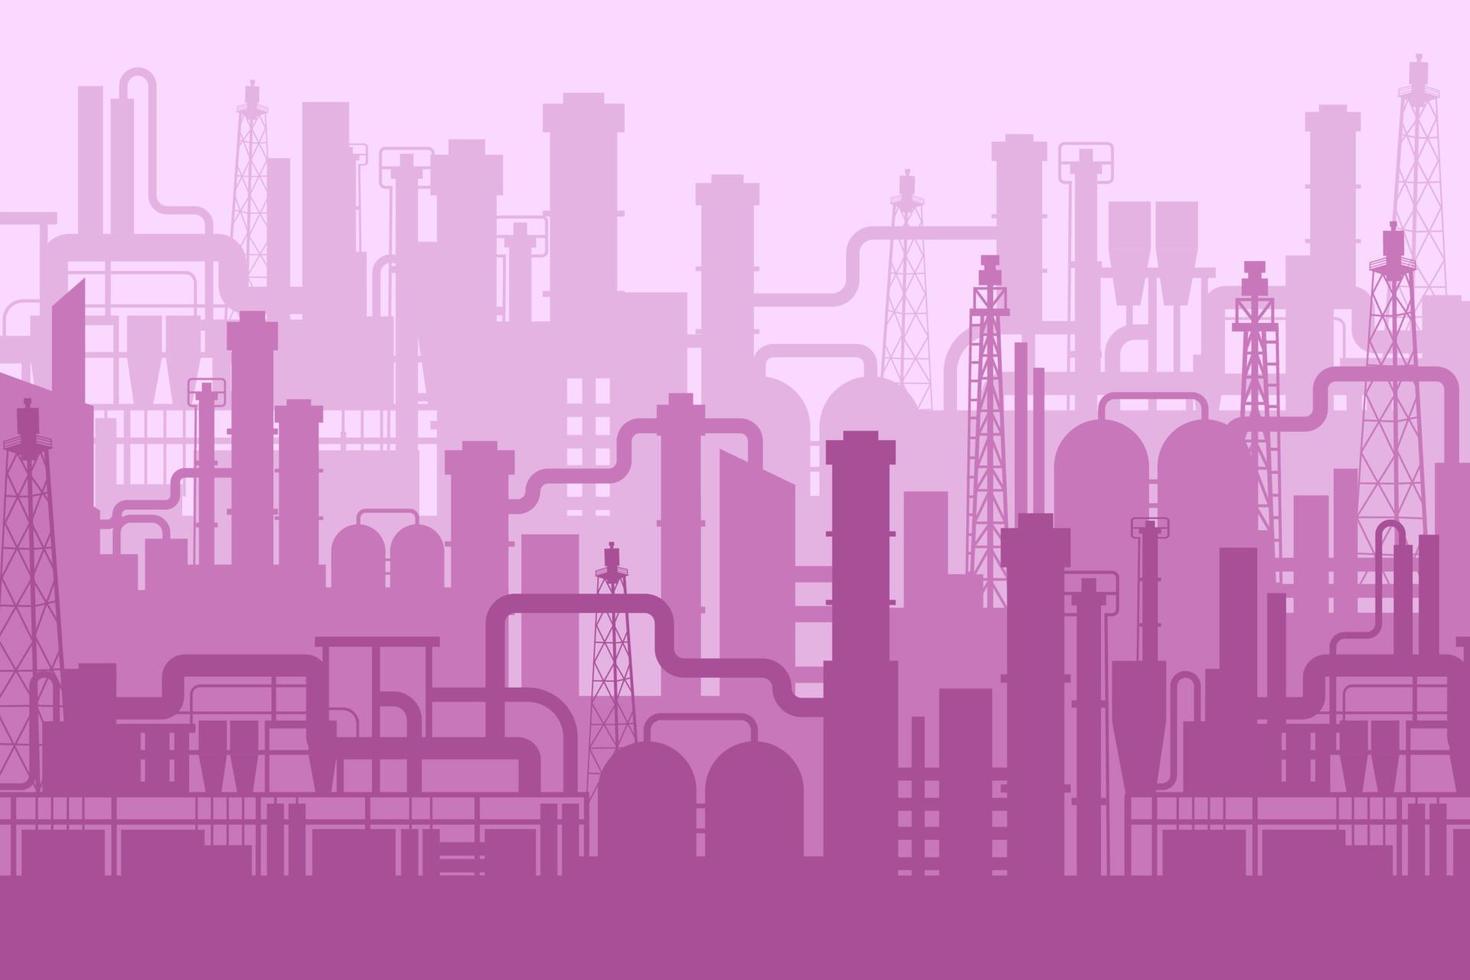 Cartoon factory manufacturing industrial plant scenery background. Futuristic pink manufacture design silhouette backdrop. Abstract building and construction exterior machinery engineering innovation vector